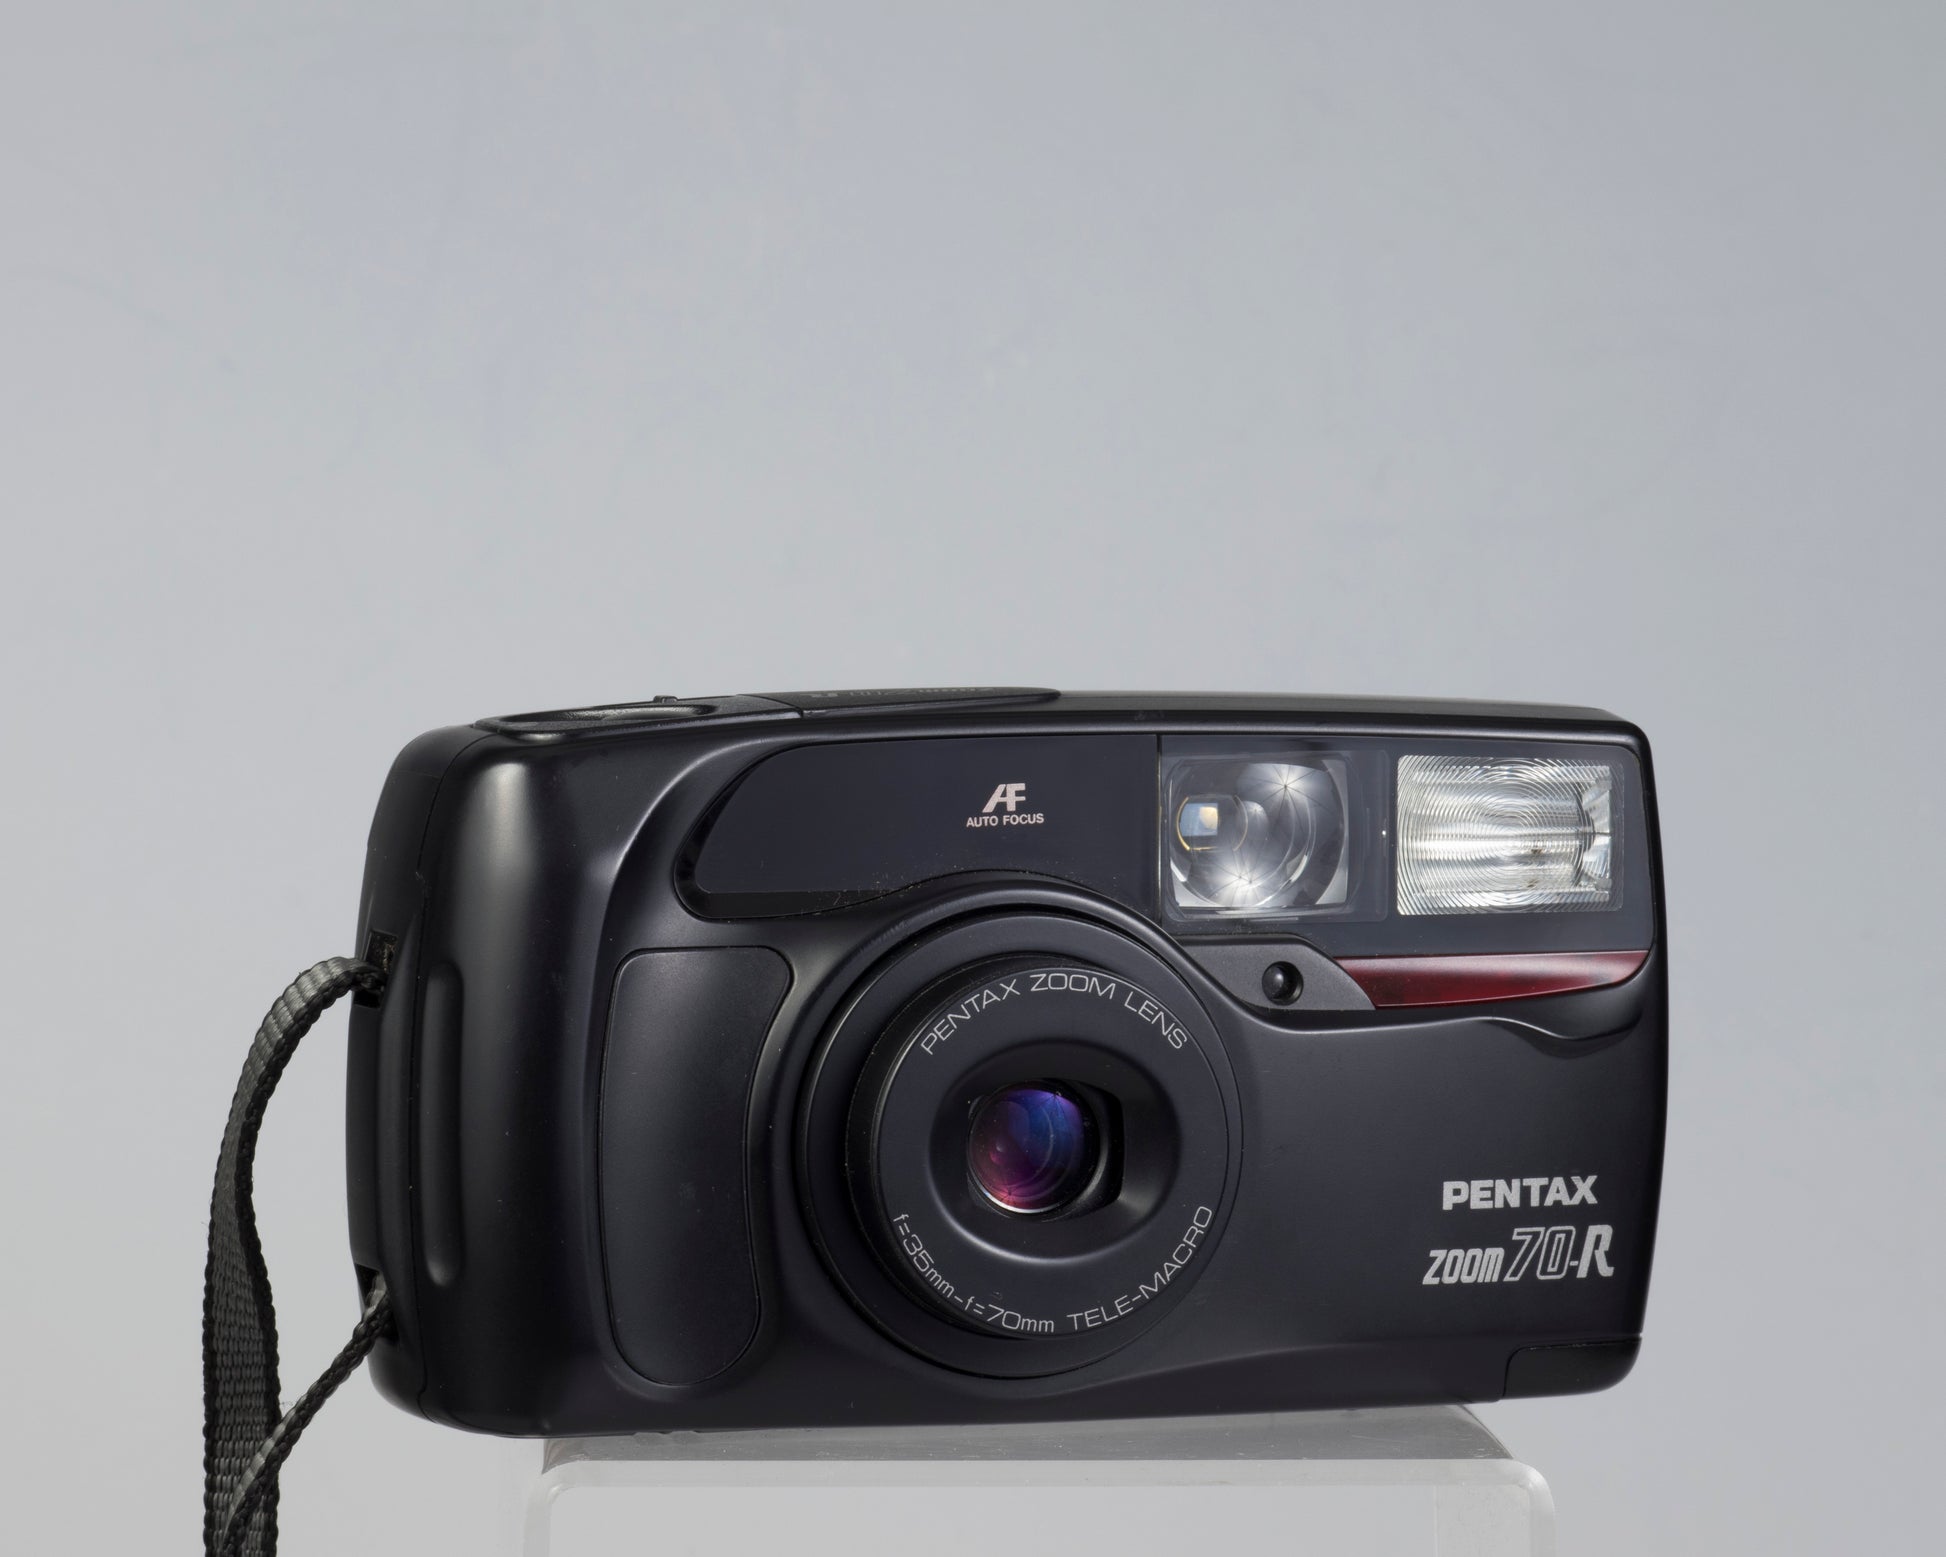 The Pentax Zoom 70-R (aka IQZoom 70-R) is a quality zoom point-and-shoot from the 1990s.